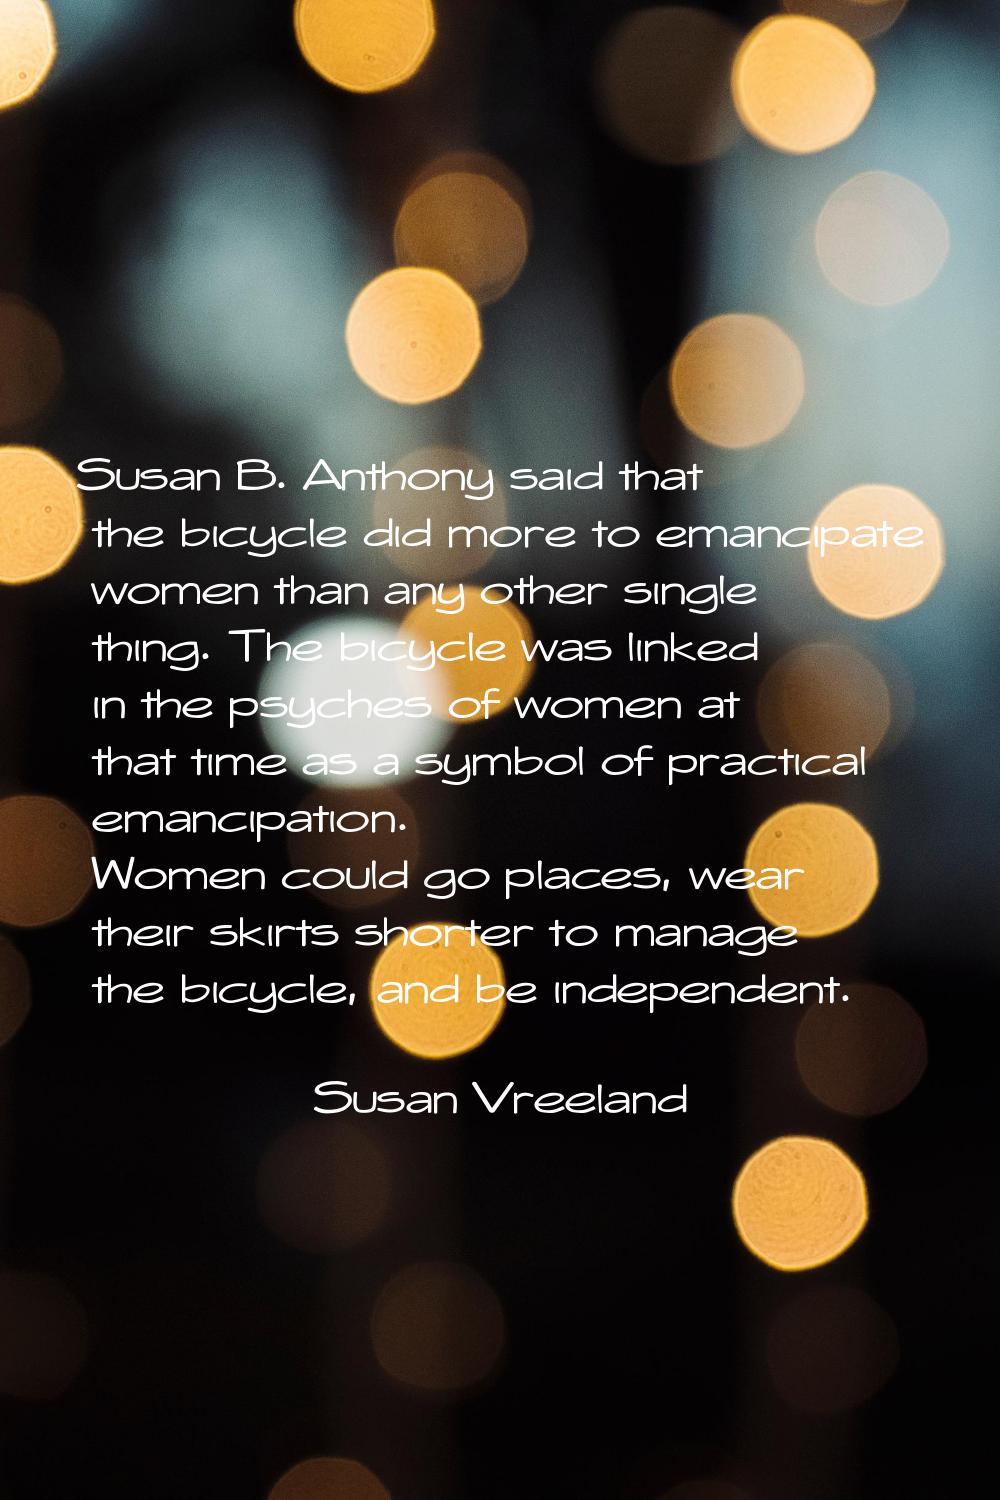 Susan B. Anthony said that the bicycle did more to emancipate women than any other single thing. Th